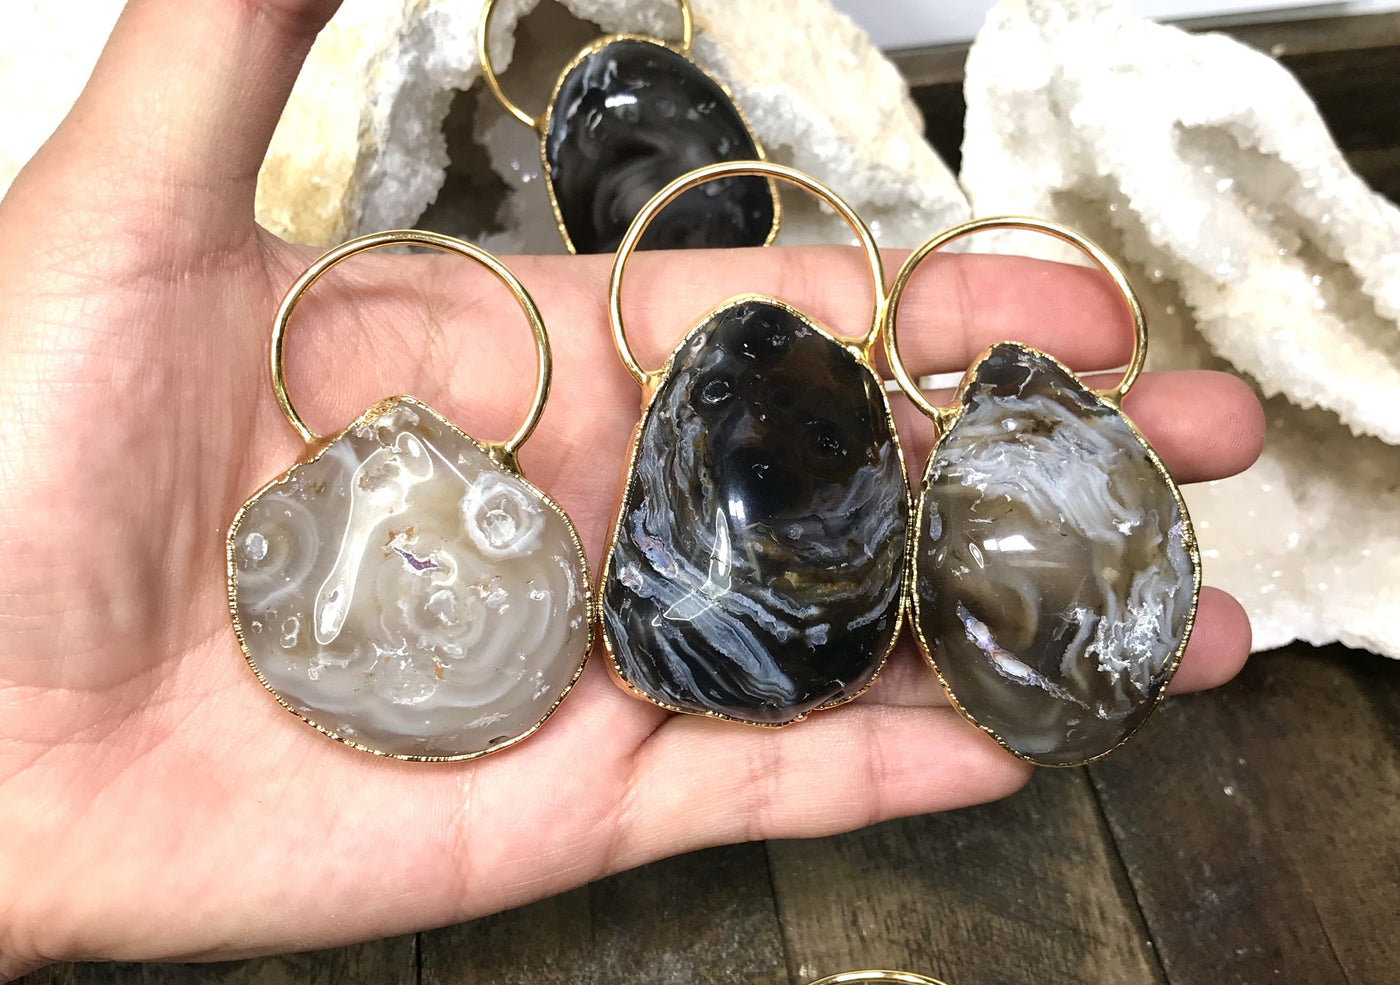 Three Agate Geode Enhydro Pendants in a hand.